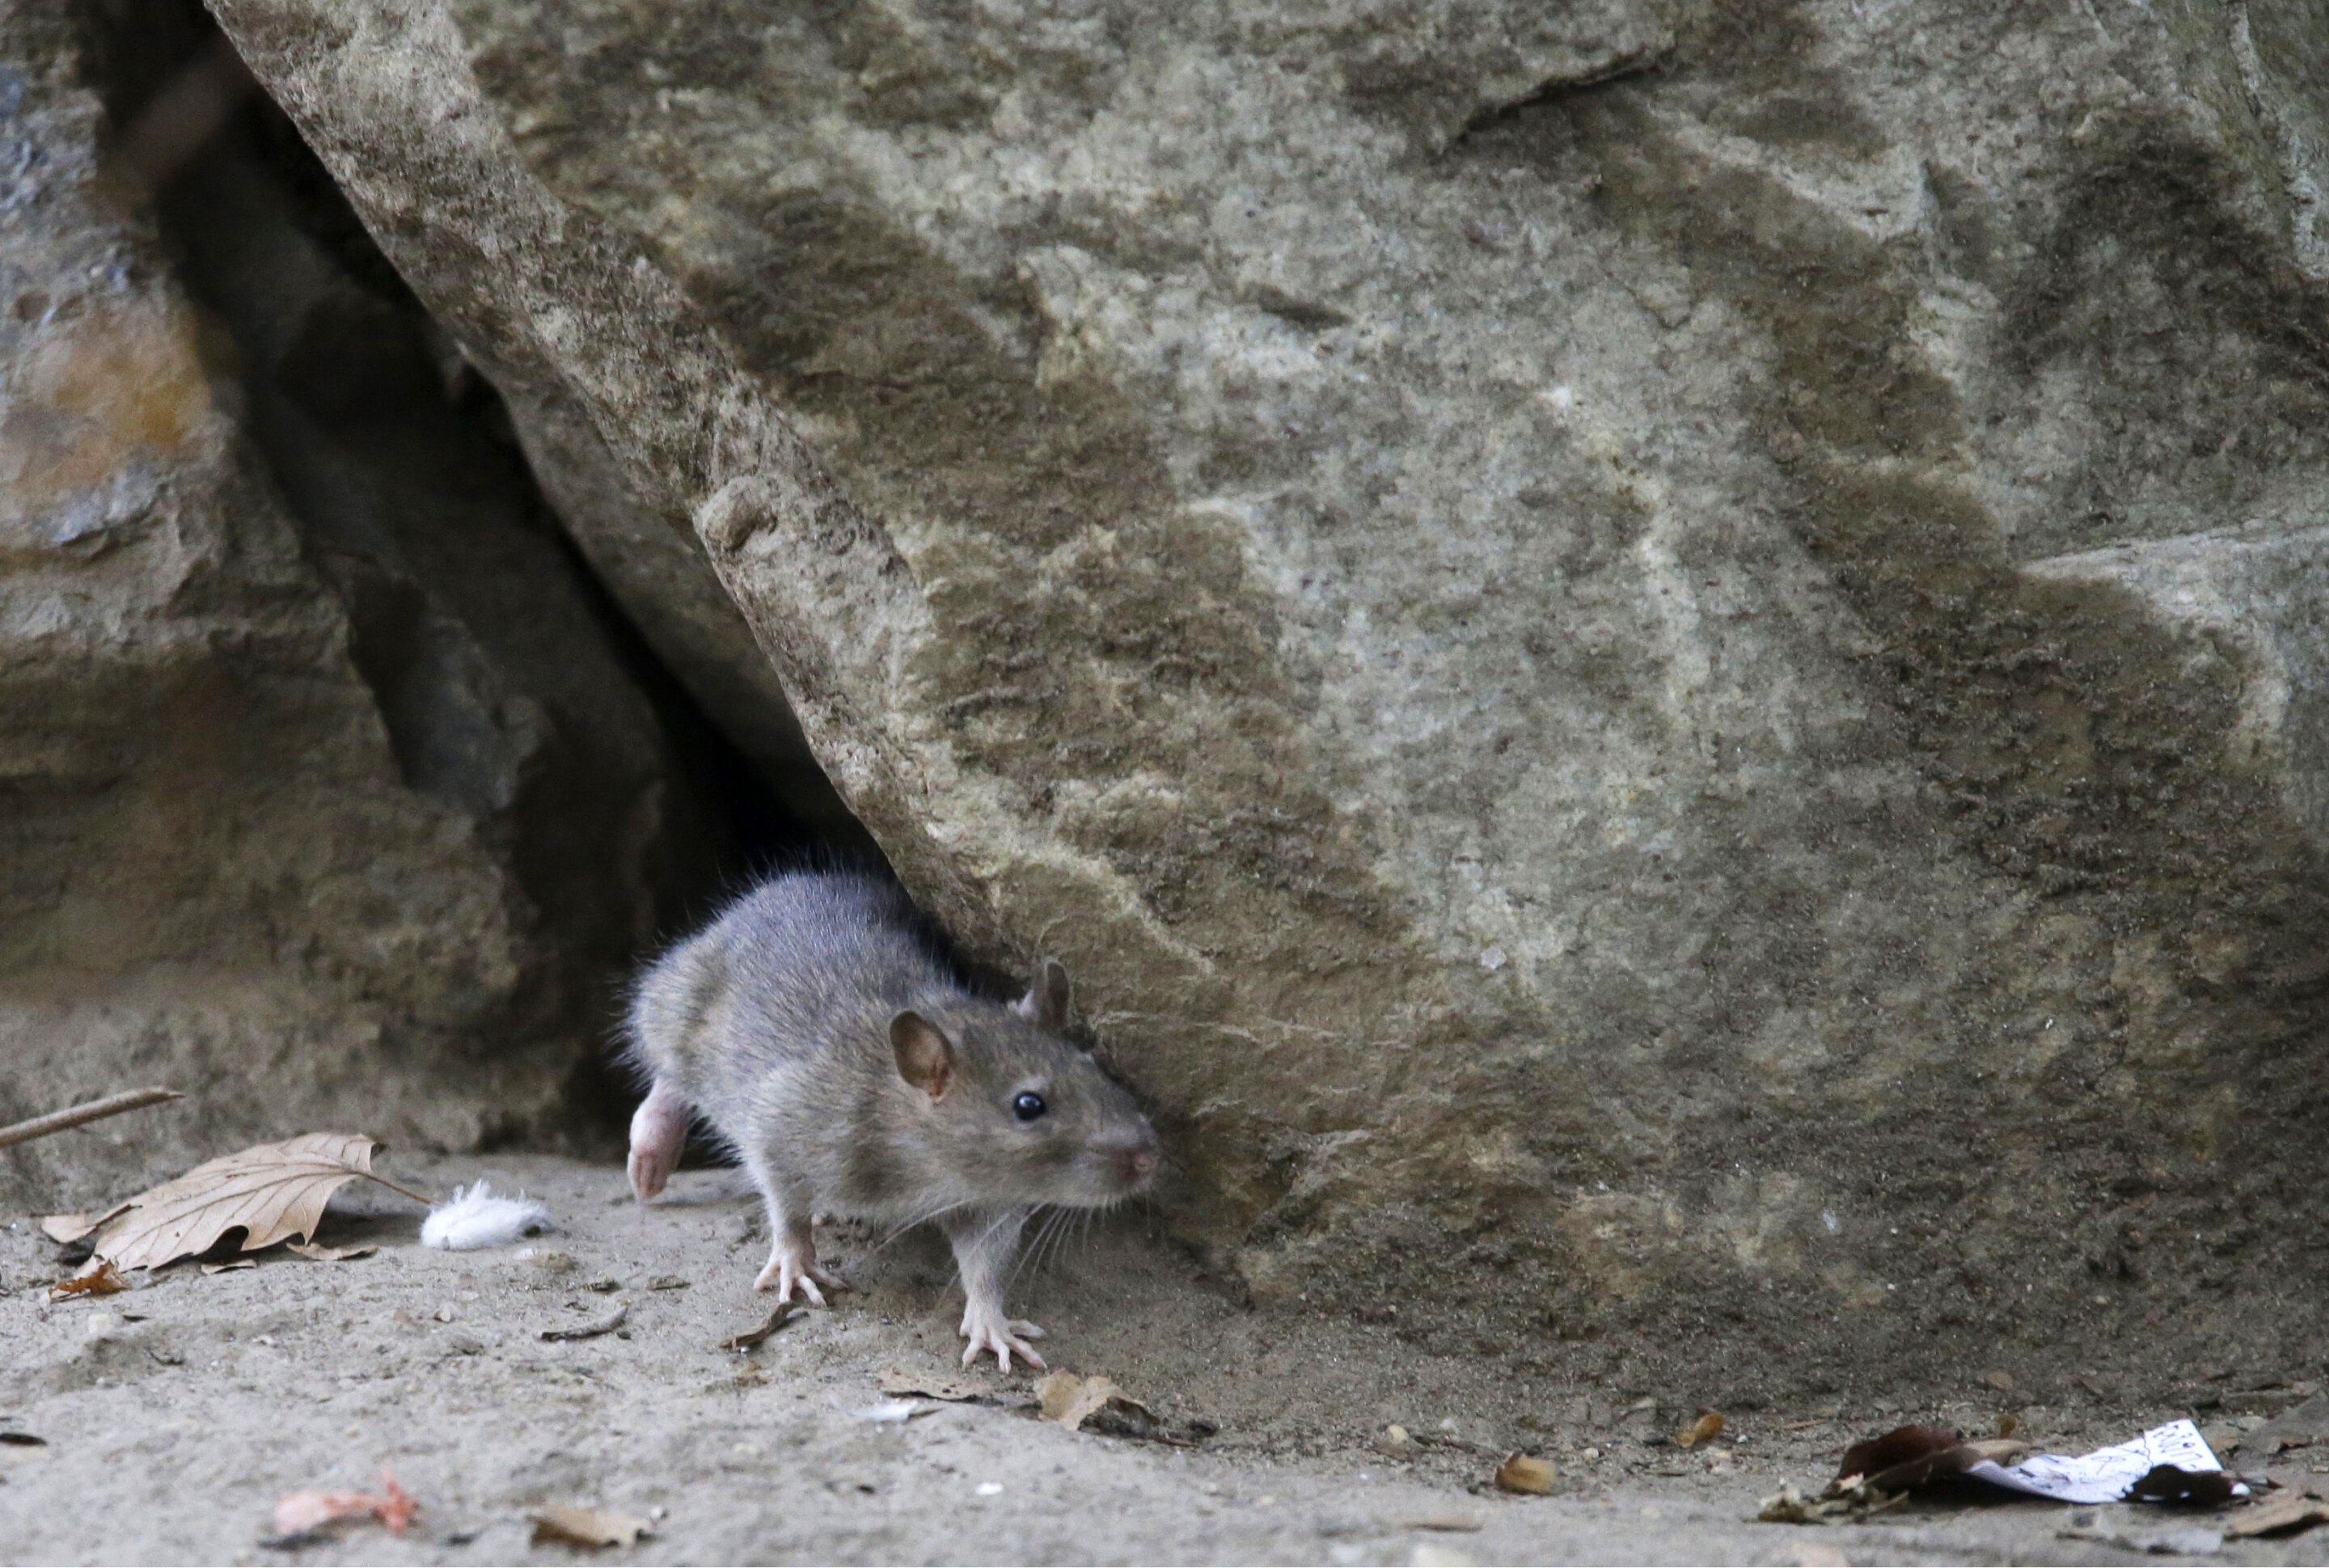 #Oh, rats! As New Yorkers emerge from pandemic, so do rodents